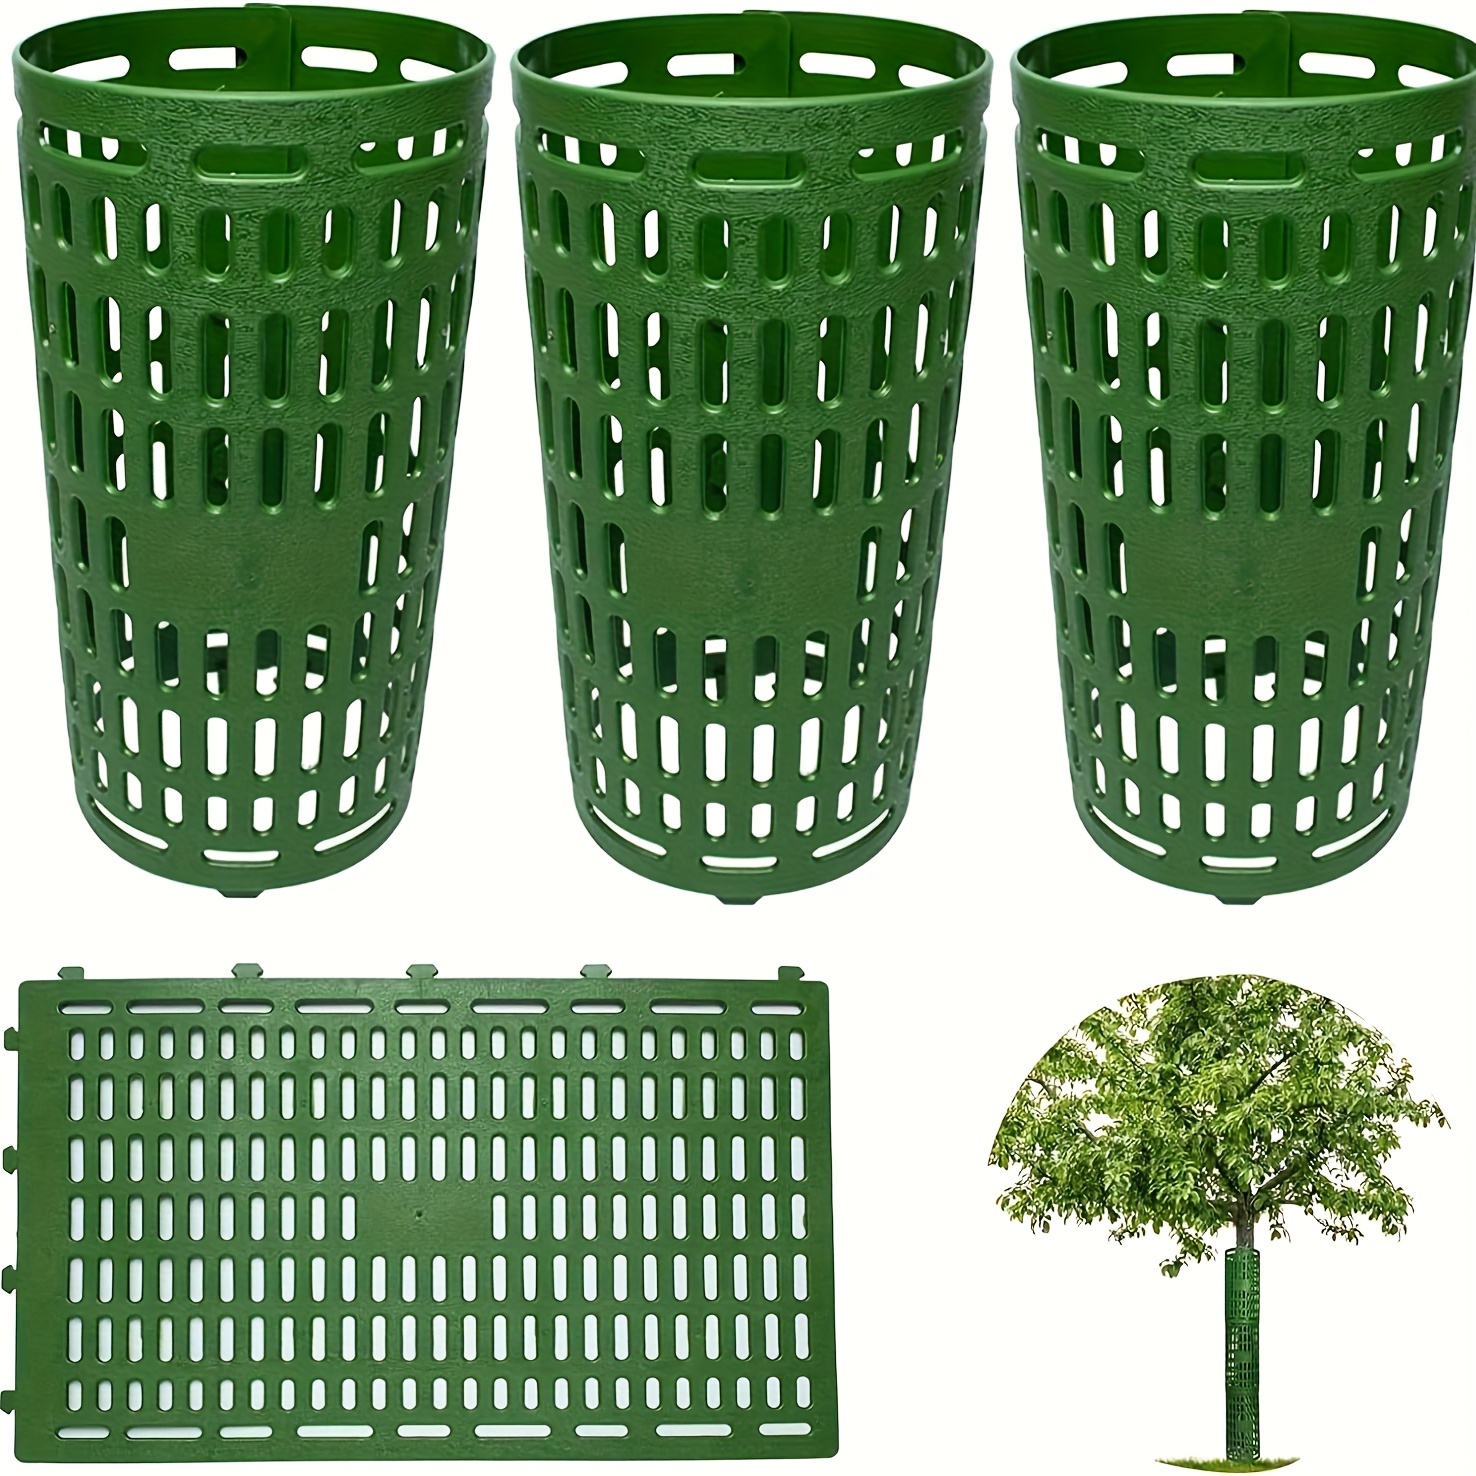 

3/6pcs, Tree Trunk Protector Wrap, Mesh Plant Covers Tree Tubes For Seedlings, Saplings, Expandable Weather-proof Durable Plant Bark Protection From Trimmers, Mowers, Rodents & Sun Scald